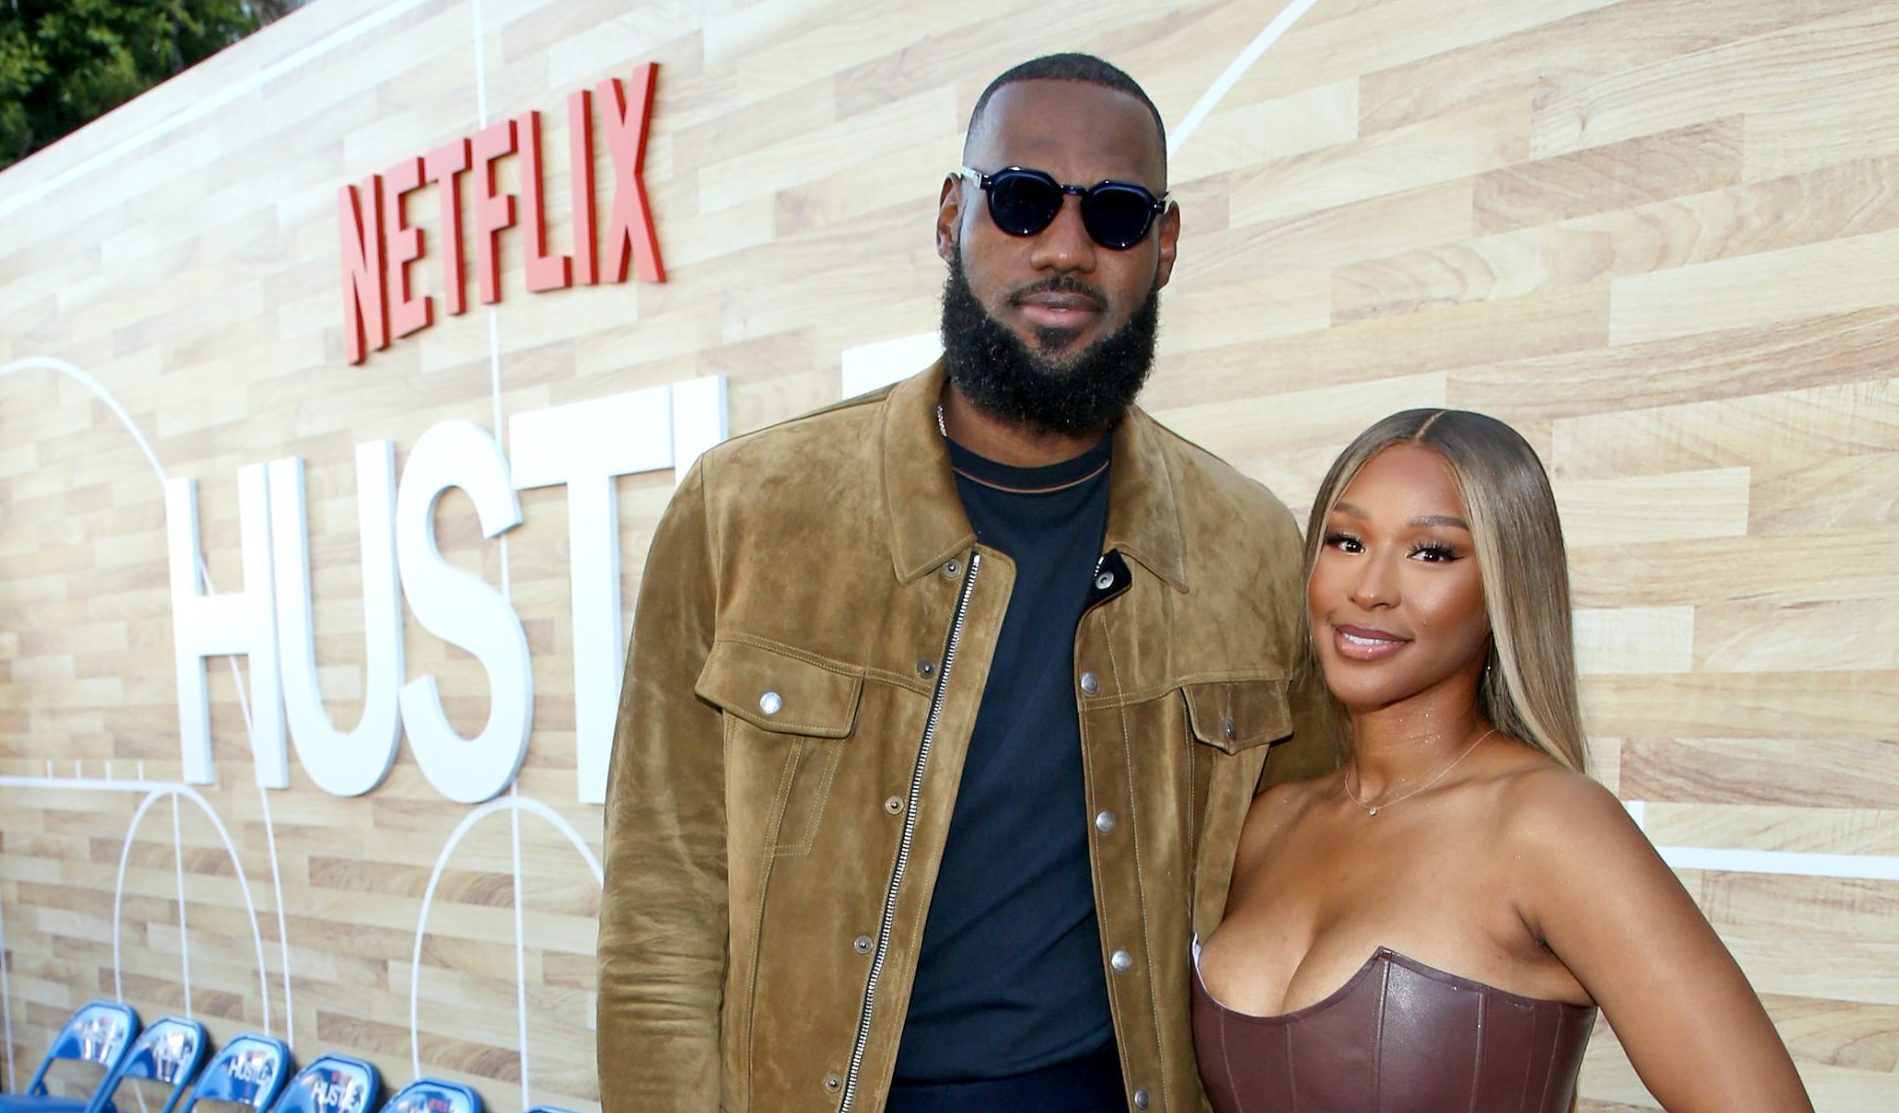 LeBron James Says He "Ain't Shit" Without His Wife Savannah James In Appreciation Post